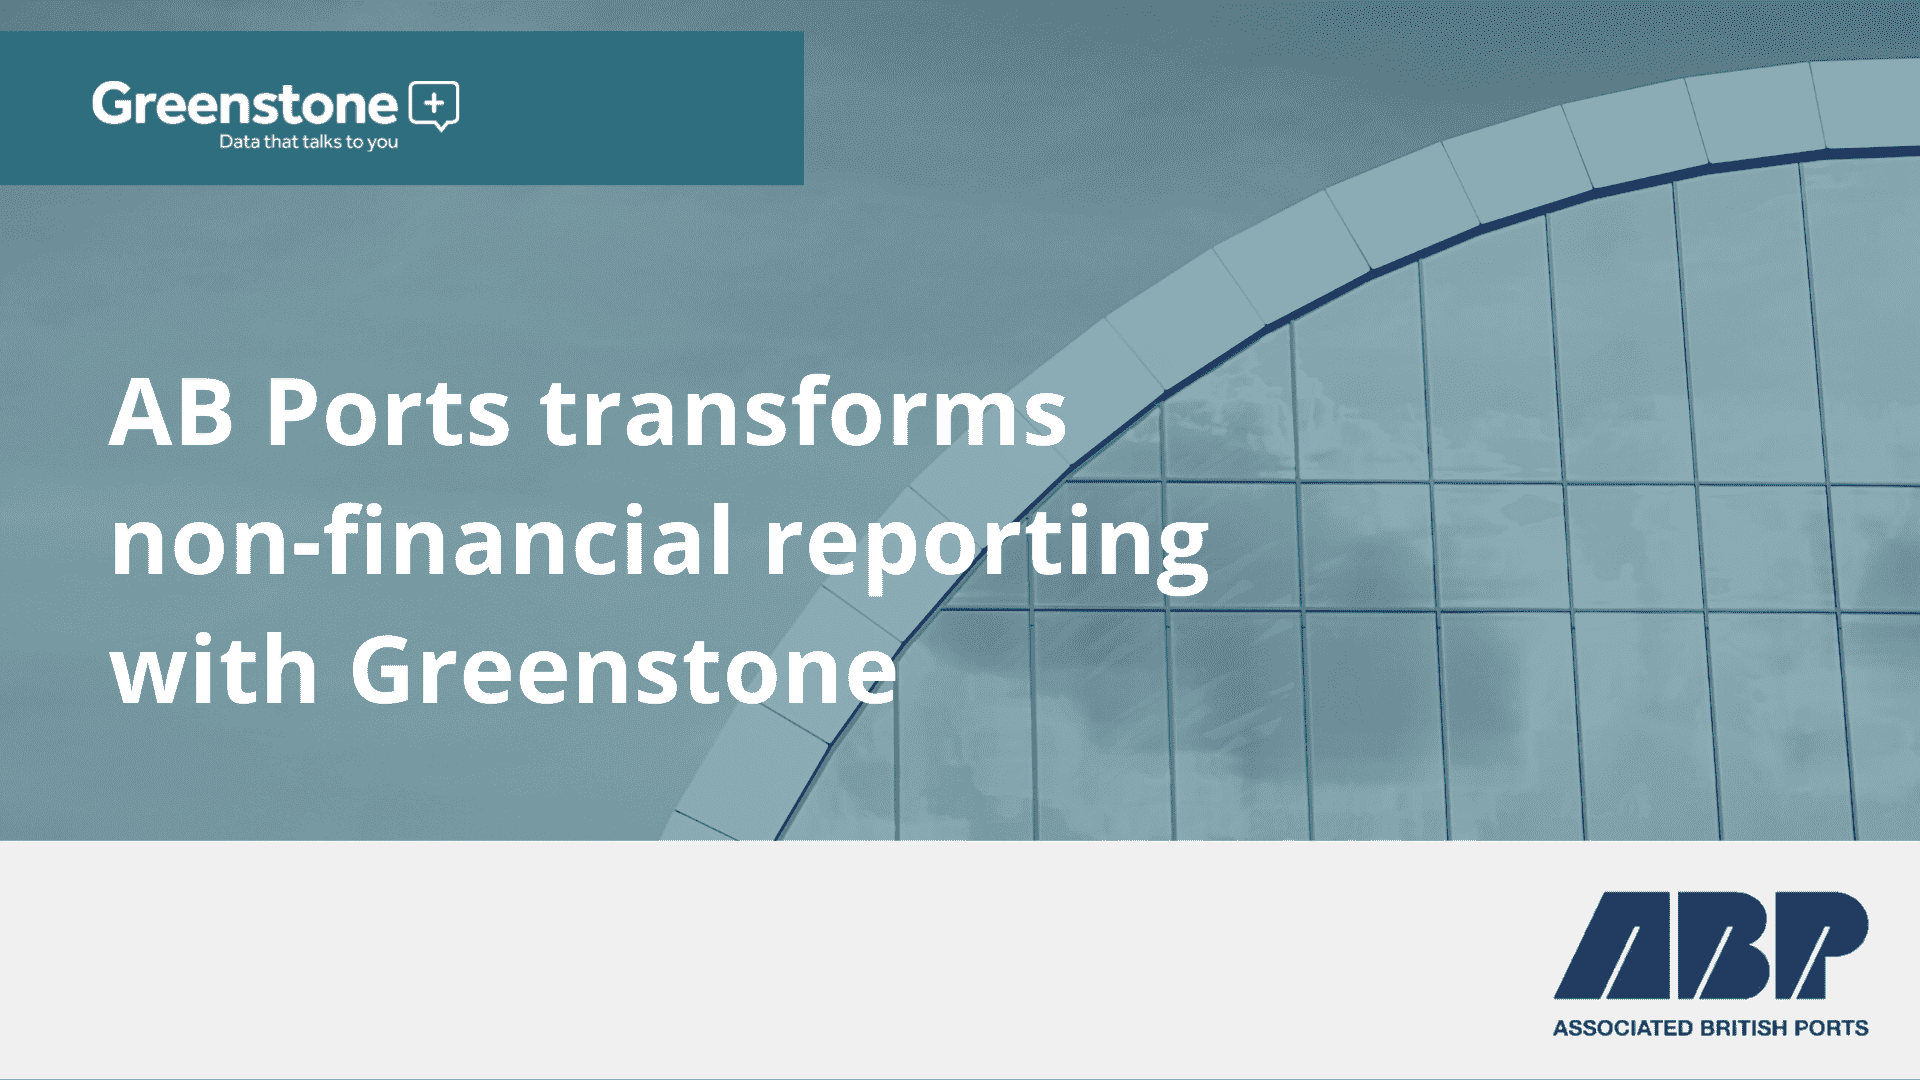 AB Ports transforms non-financial reporting with Greenstone